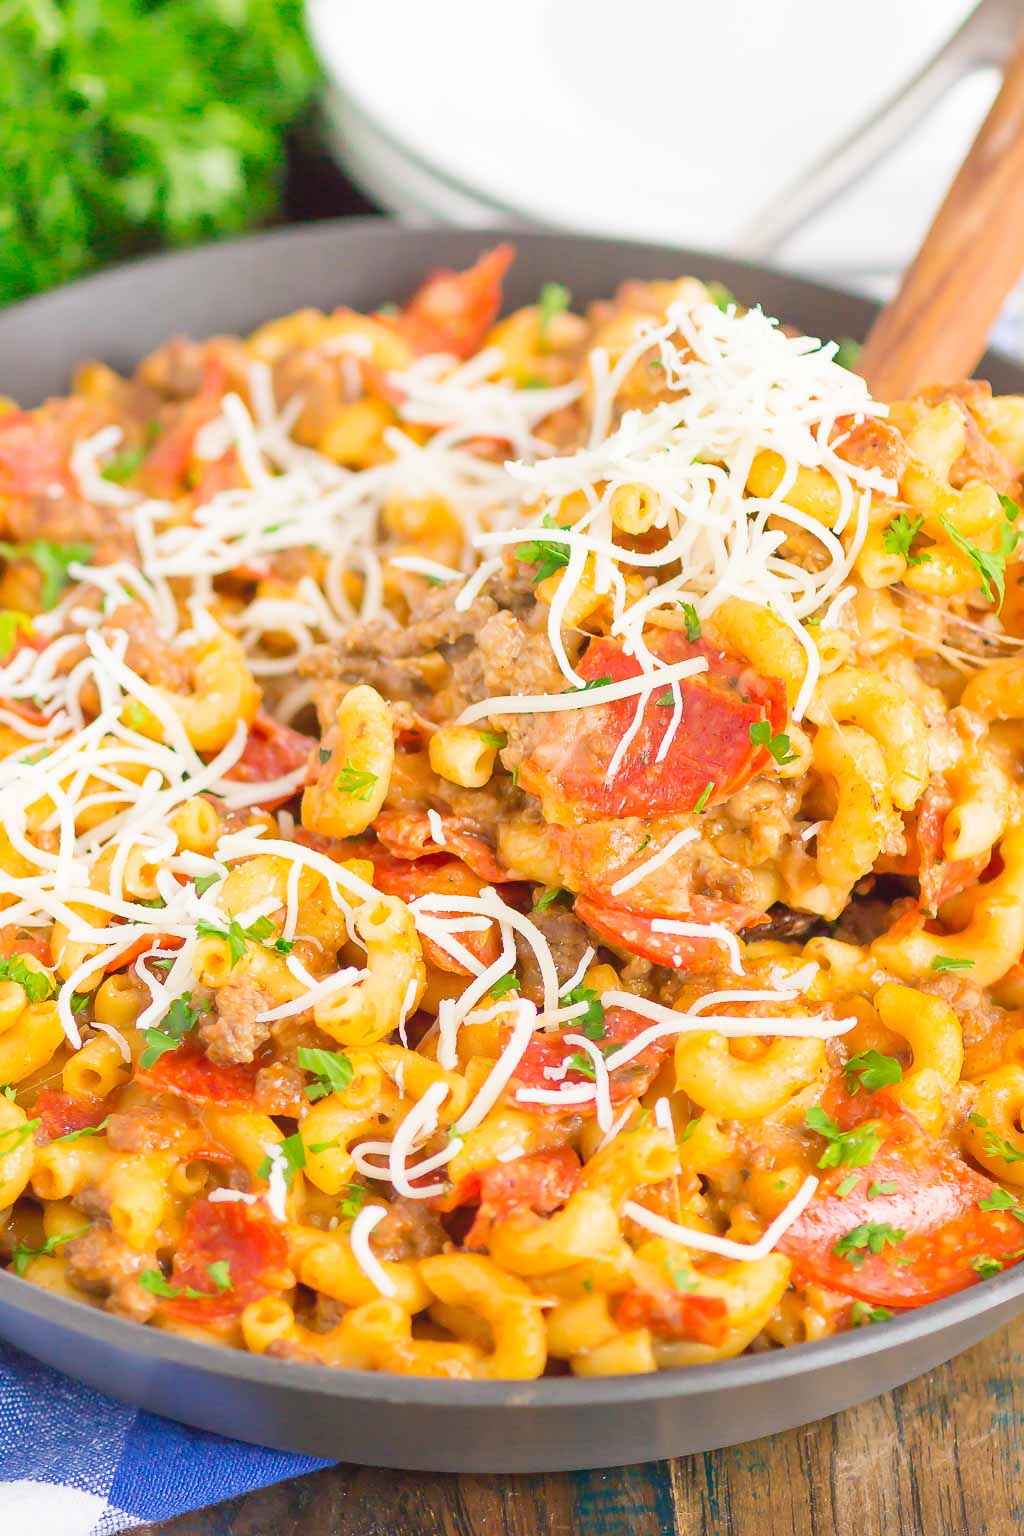 This Pepperoni Pizza Hamburger Helper is a simple, one pan dish that's ready in just 30 minutes. Better than the boxed kind, this cheesy pasta combines the classic flavors of pepperoni pizza that'll be a hit at the dinner table for years to come! #hamburgerhelper #pizzahamburgerhelper #pizzacasserole #pasta #pizzapasta #onepot